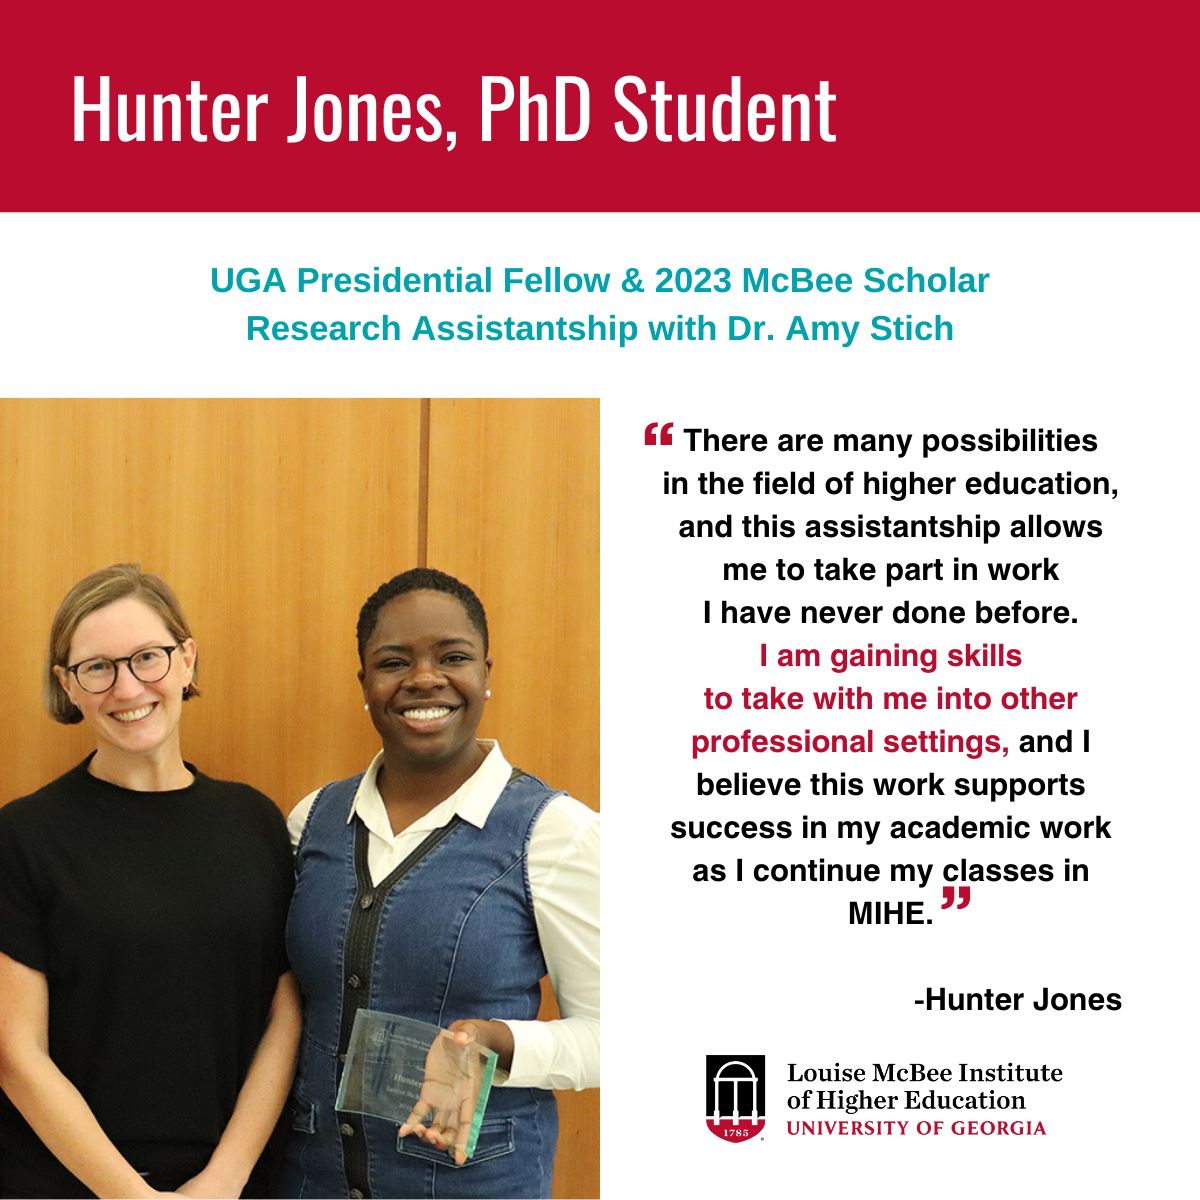 Hunter Jones works with @amy_stich on research projects that draw on and reinforce coursework. These practical experiences & skills position Hunter for success, not only in PhD program, but beyond. Thanks @UGAGradSchool School for supporting Hunter as a Presidential Fellow!